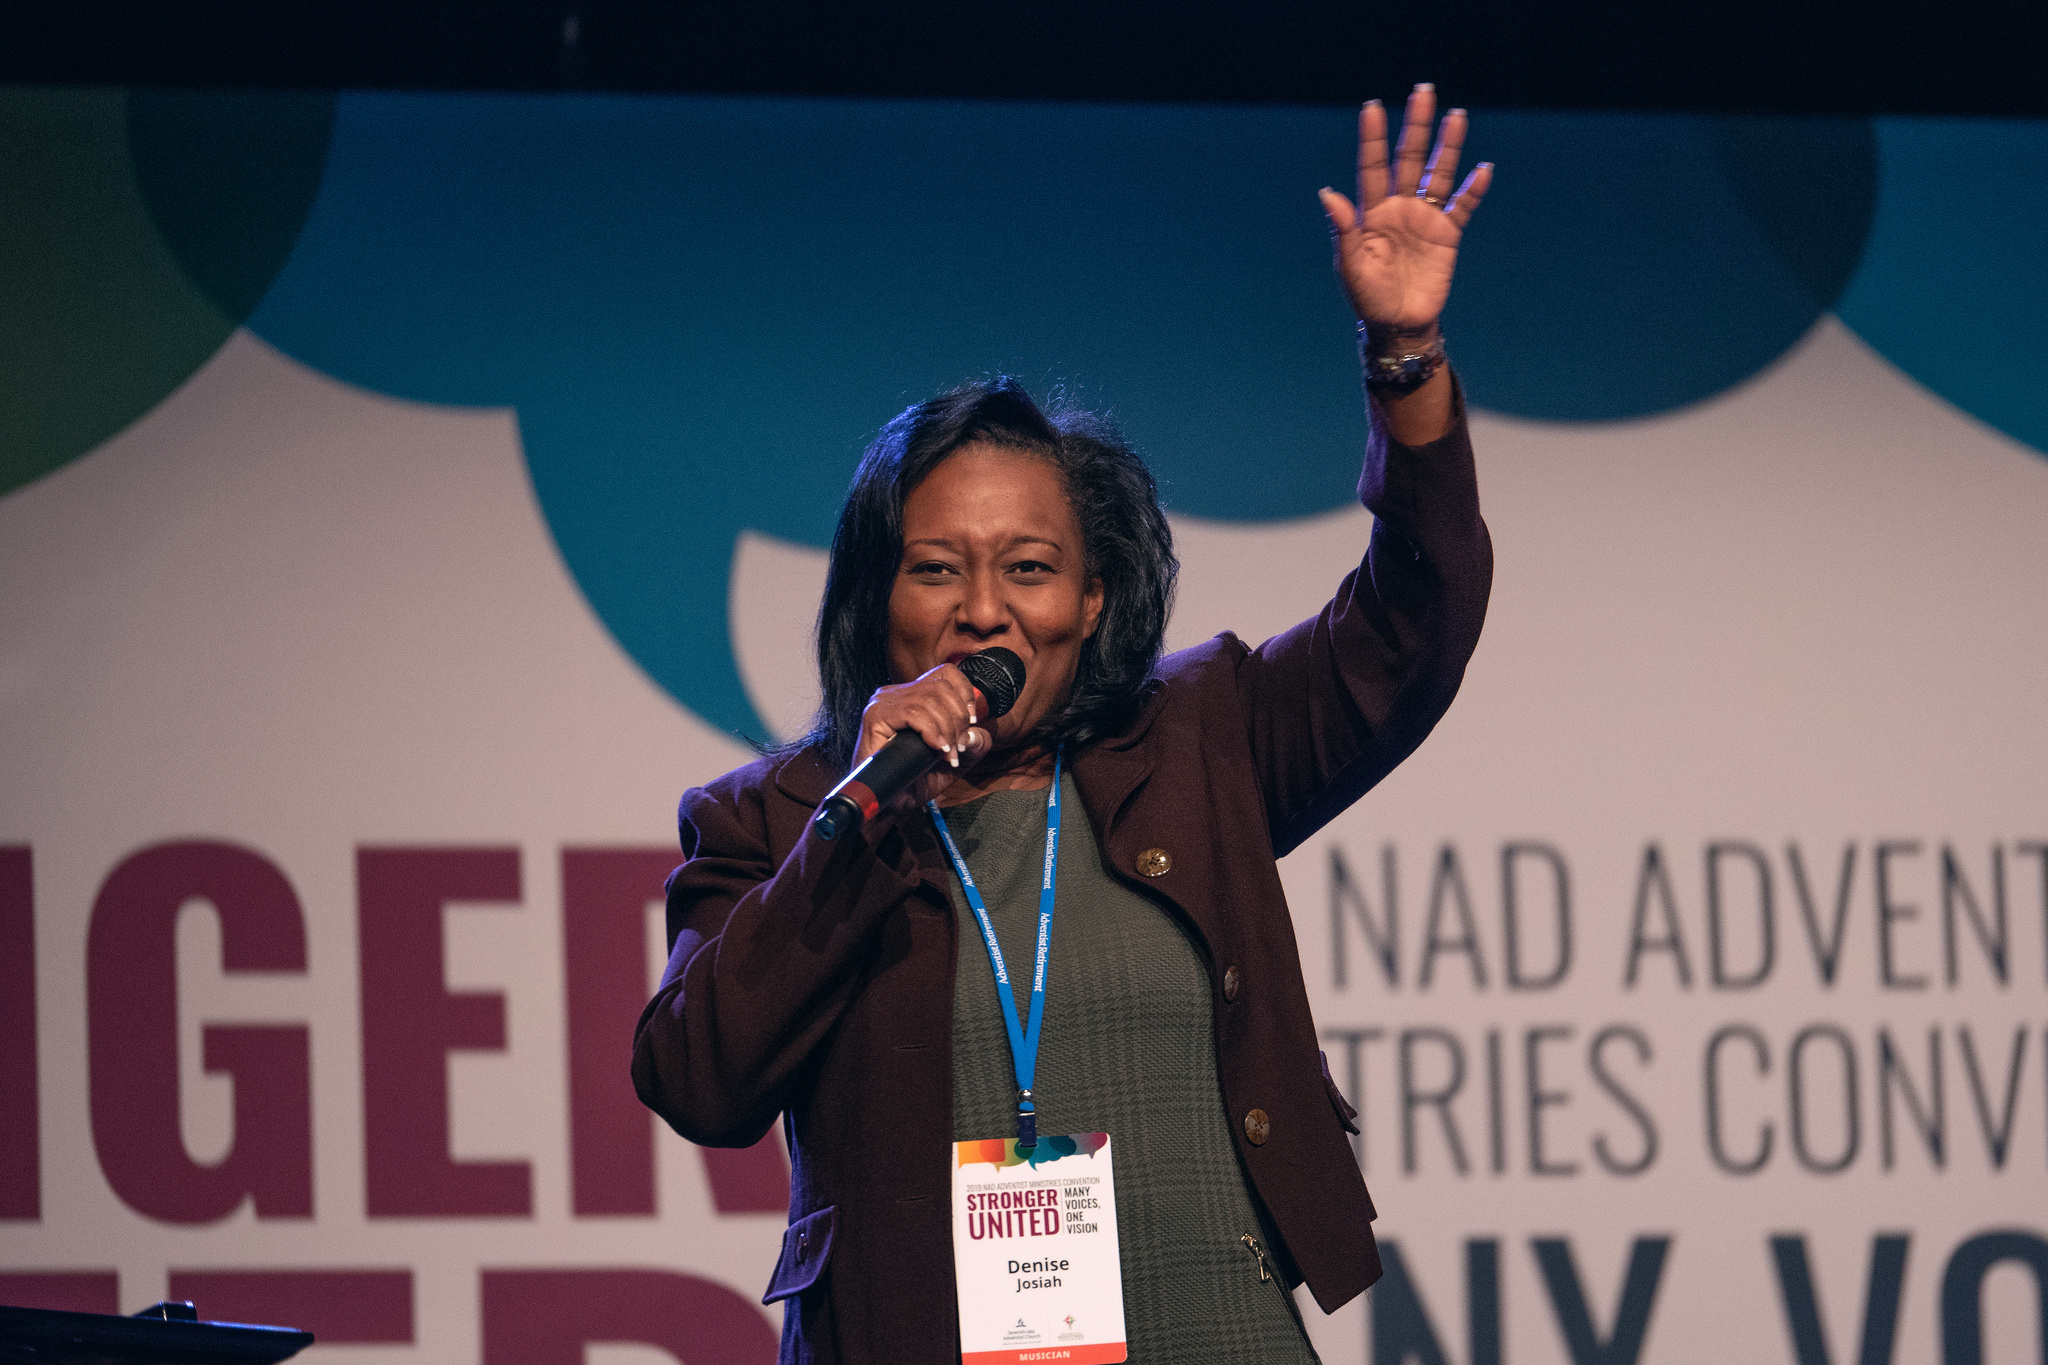 Denise Josiah sings during the 2019 AMC in Albuquerque. Photo by Pieter Damsteegt